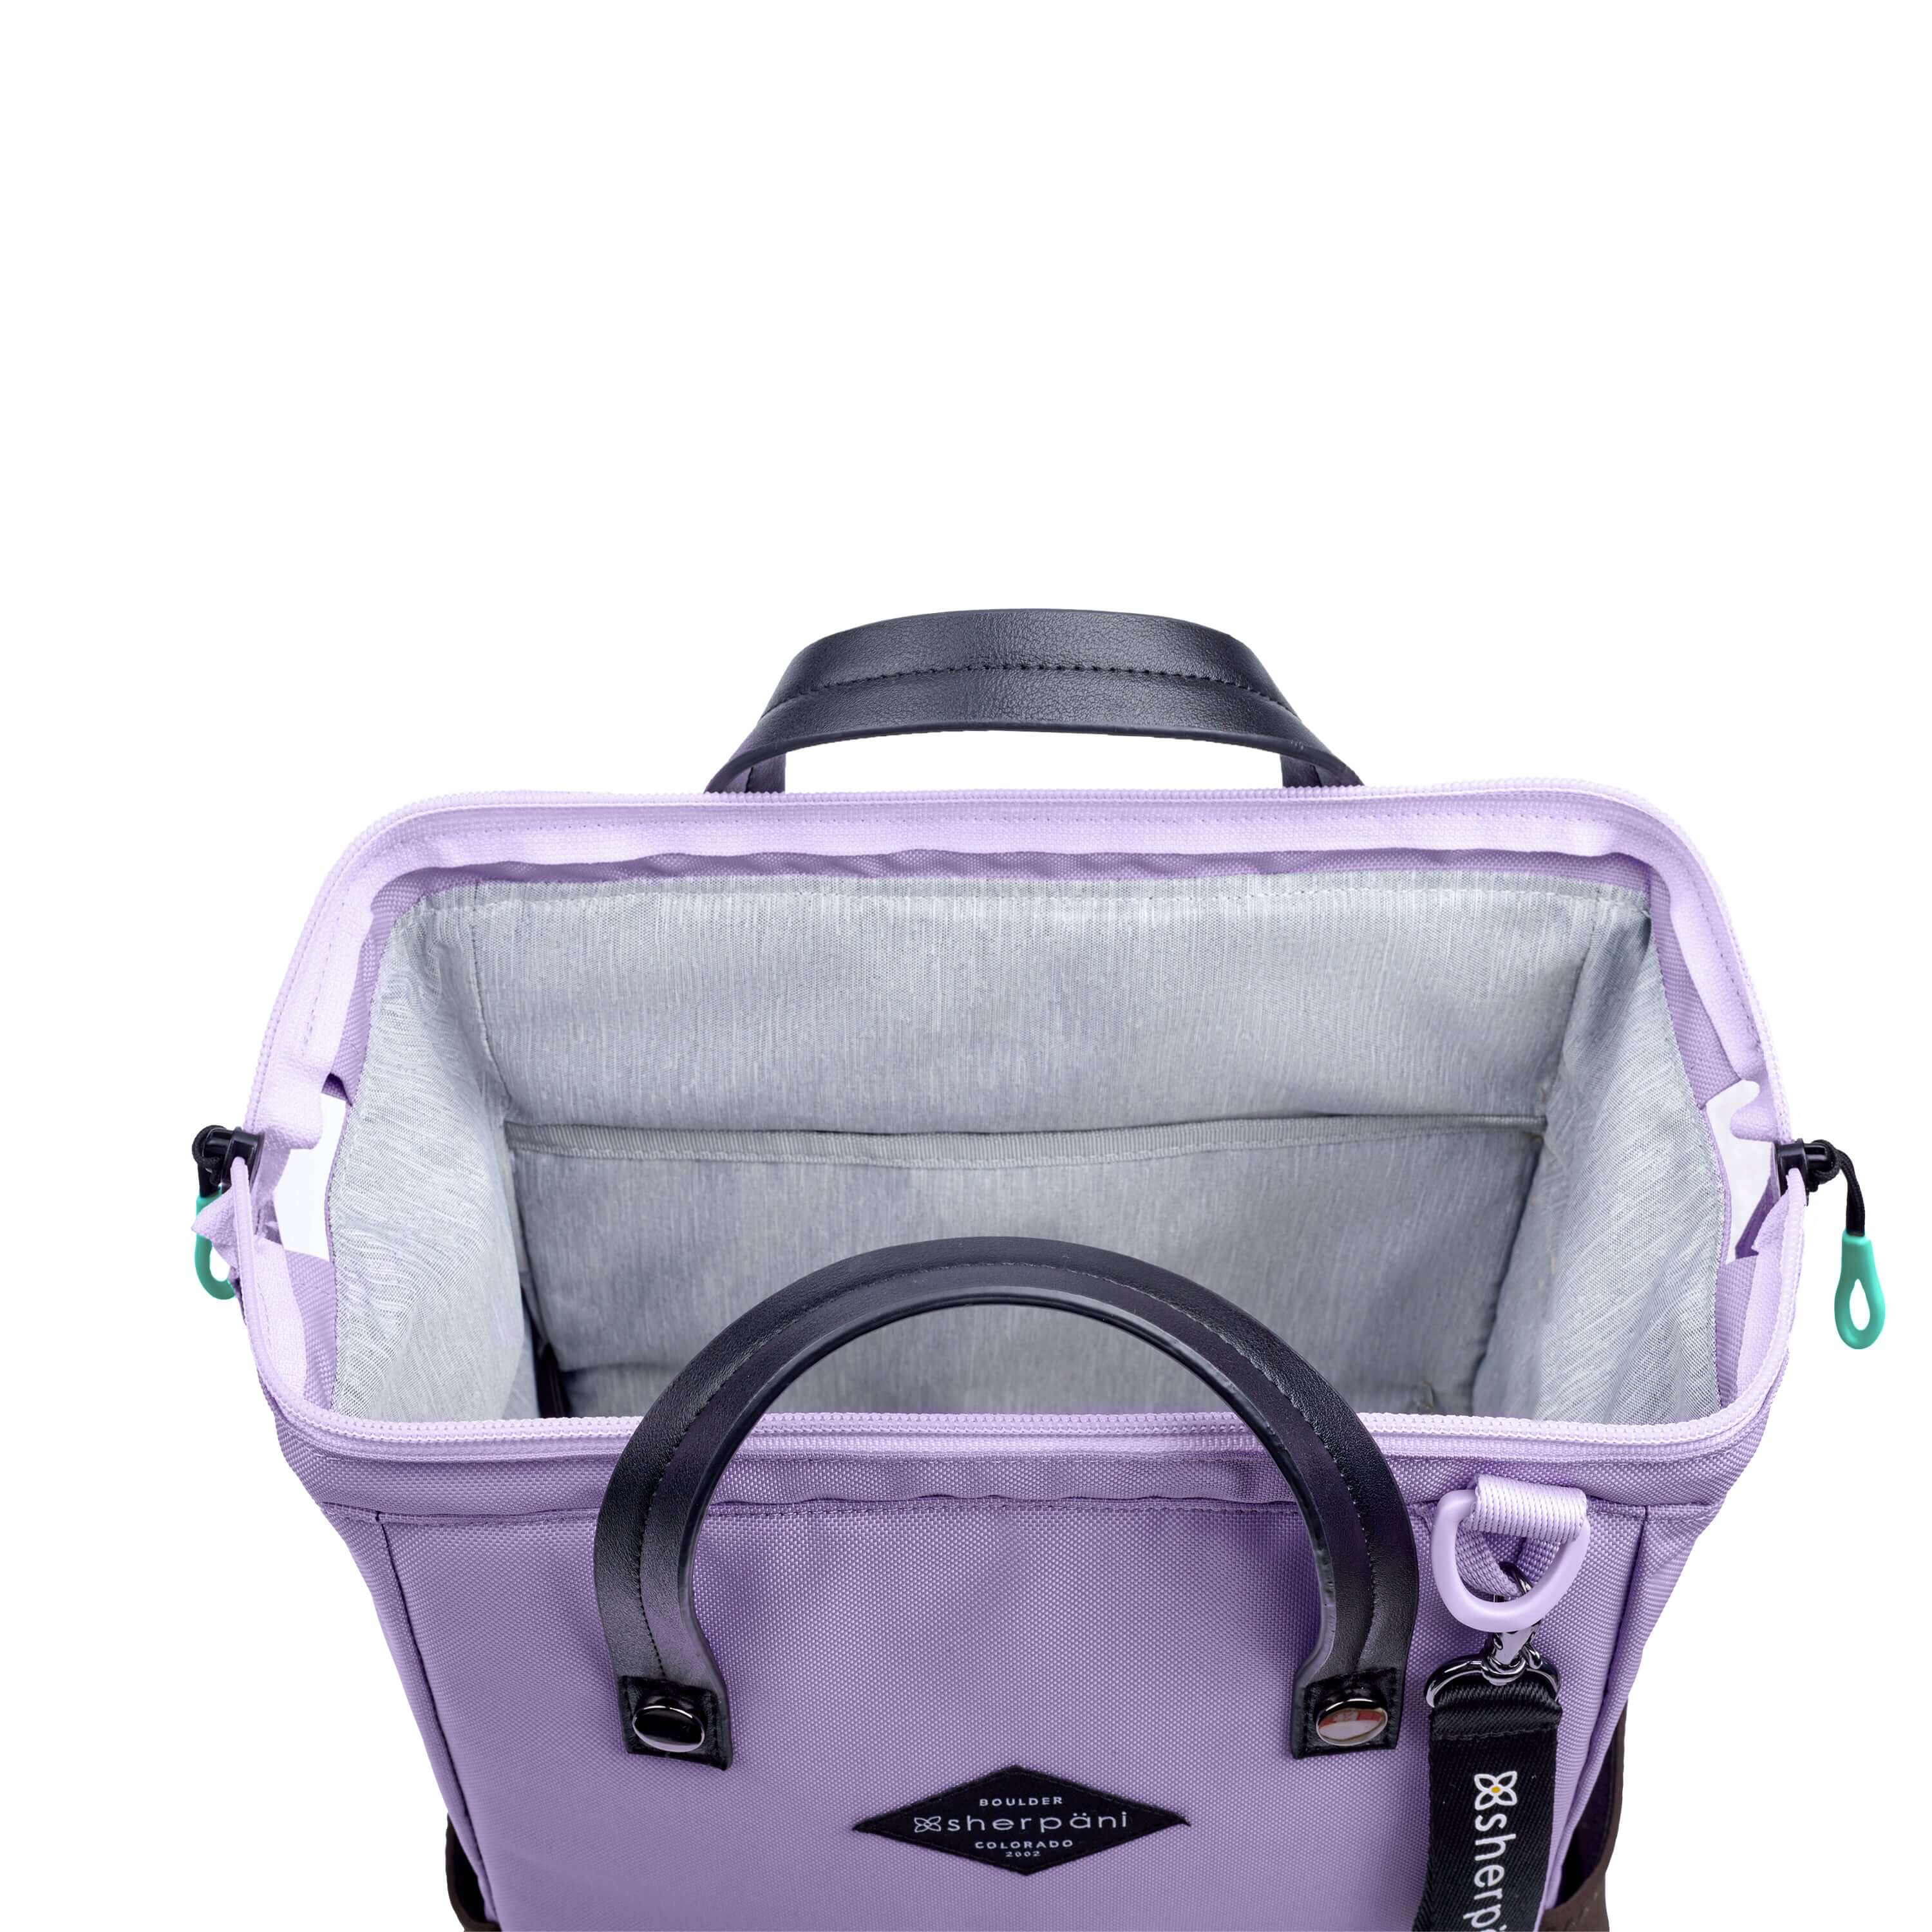 Top view of Sherpani three-in-one bag, the Dispatch in Lavender. The main zipper compartment is open to reveal a doctor bag style opening with a rectangular metal frame. The inside of the bag is light gray and features an internal pouch. 